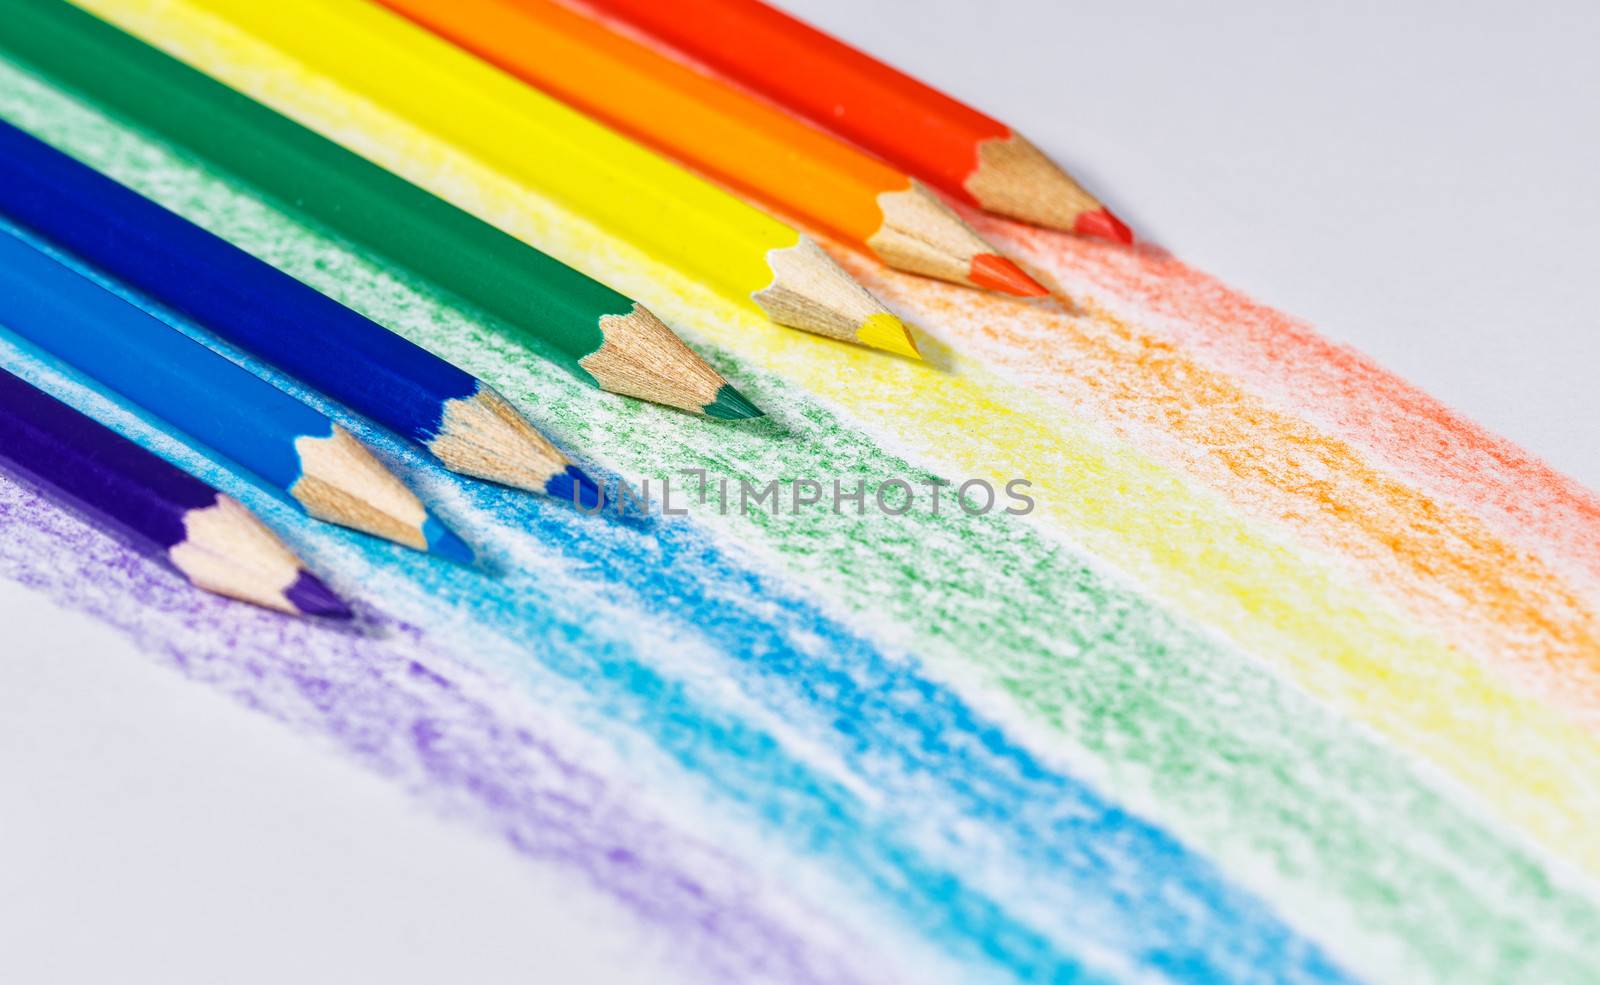 Rainbow colored pencils on textured paper shot close up